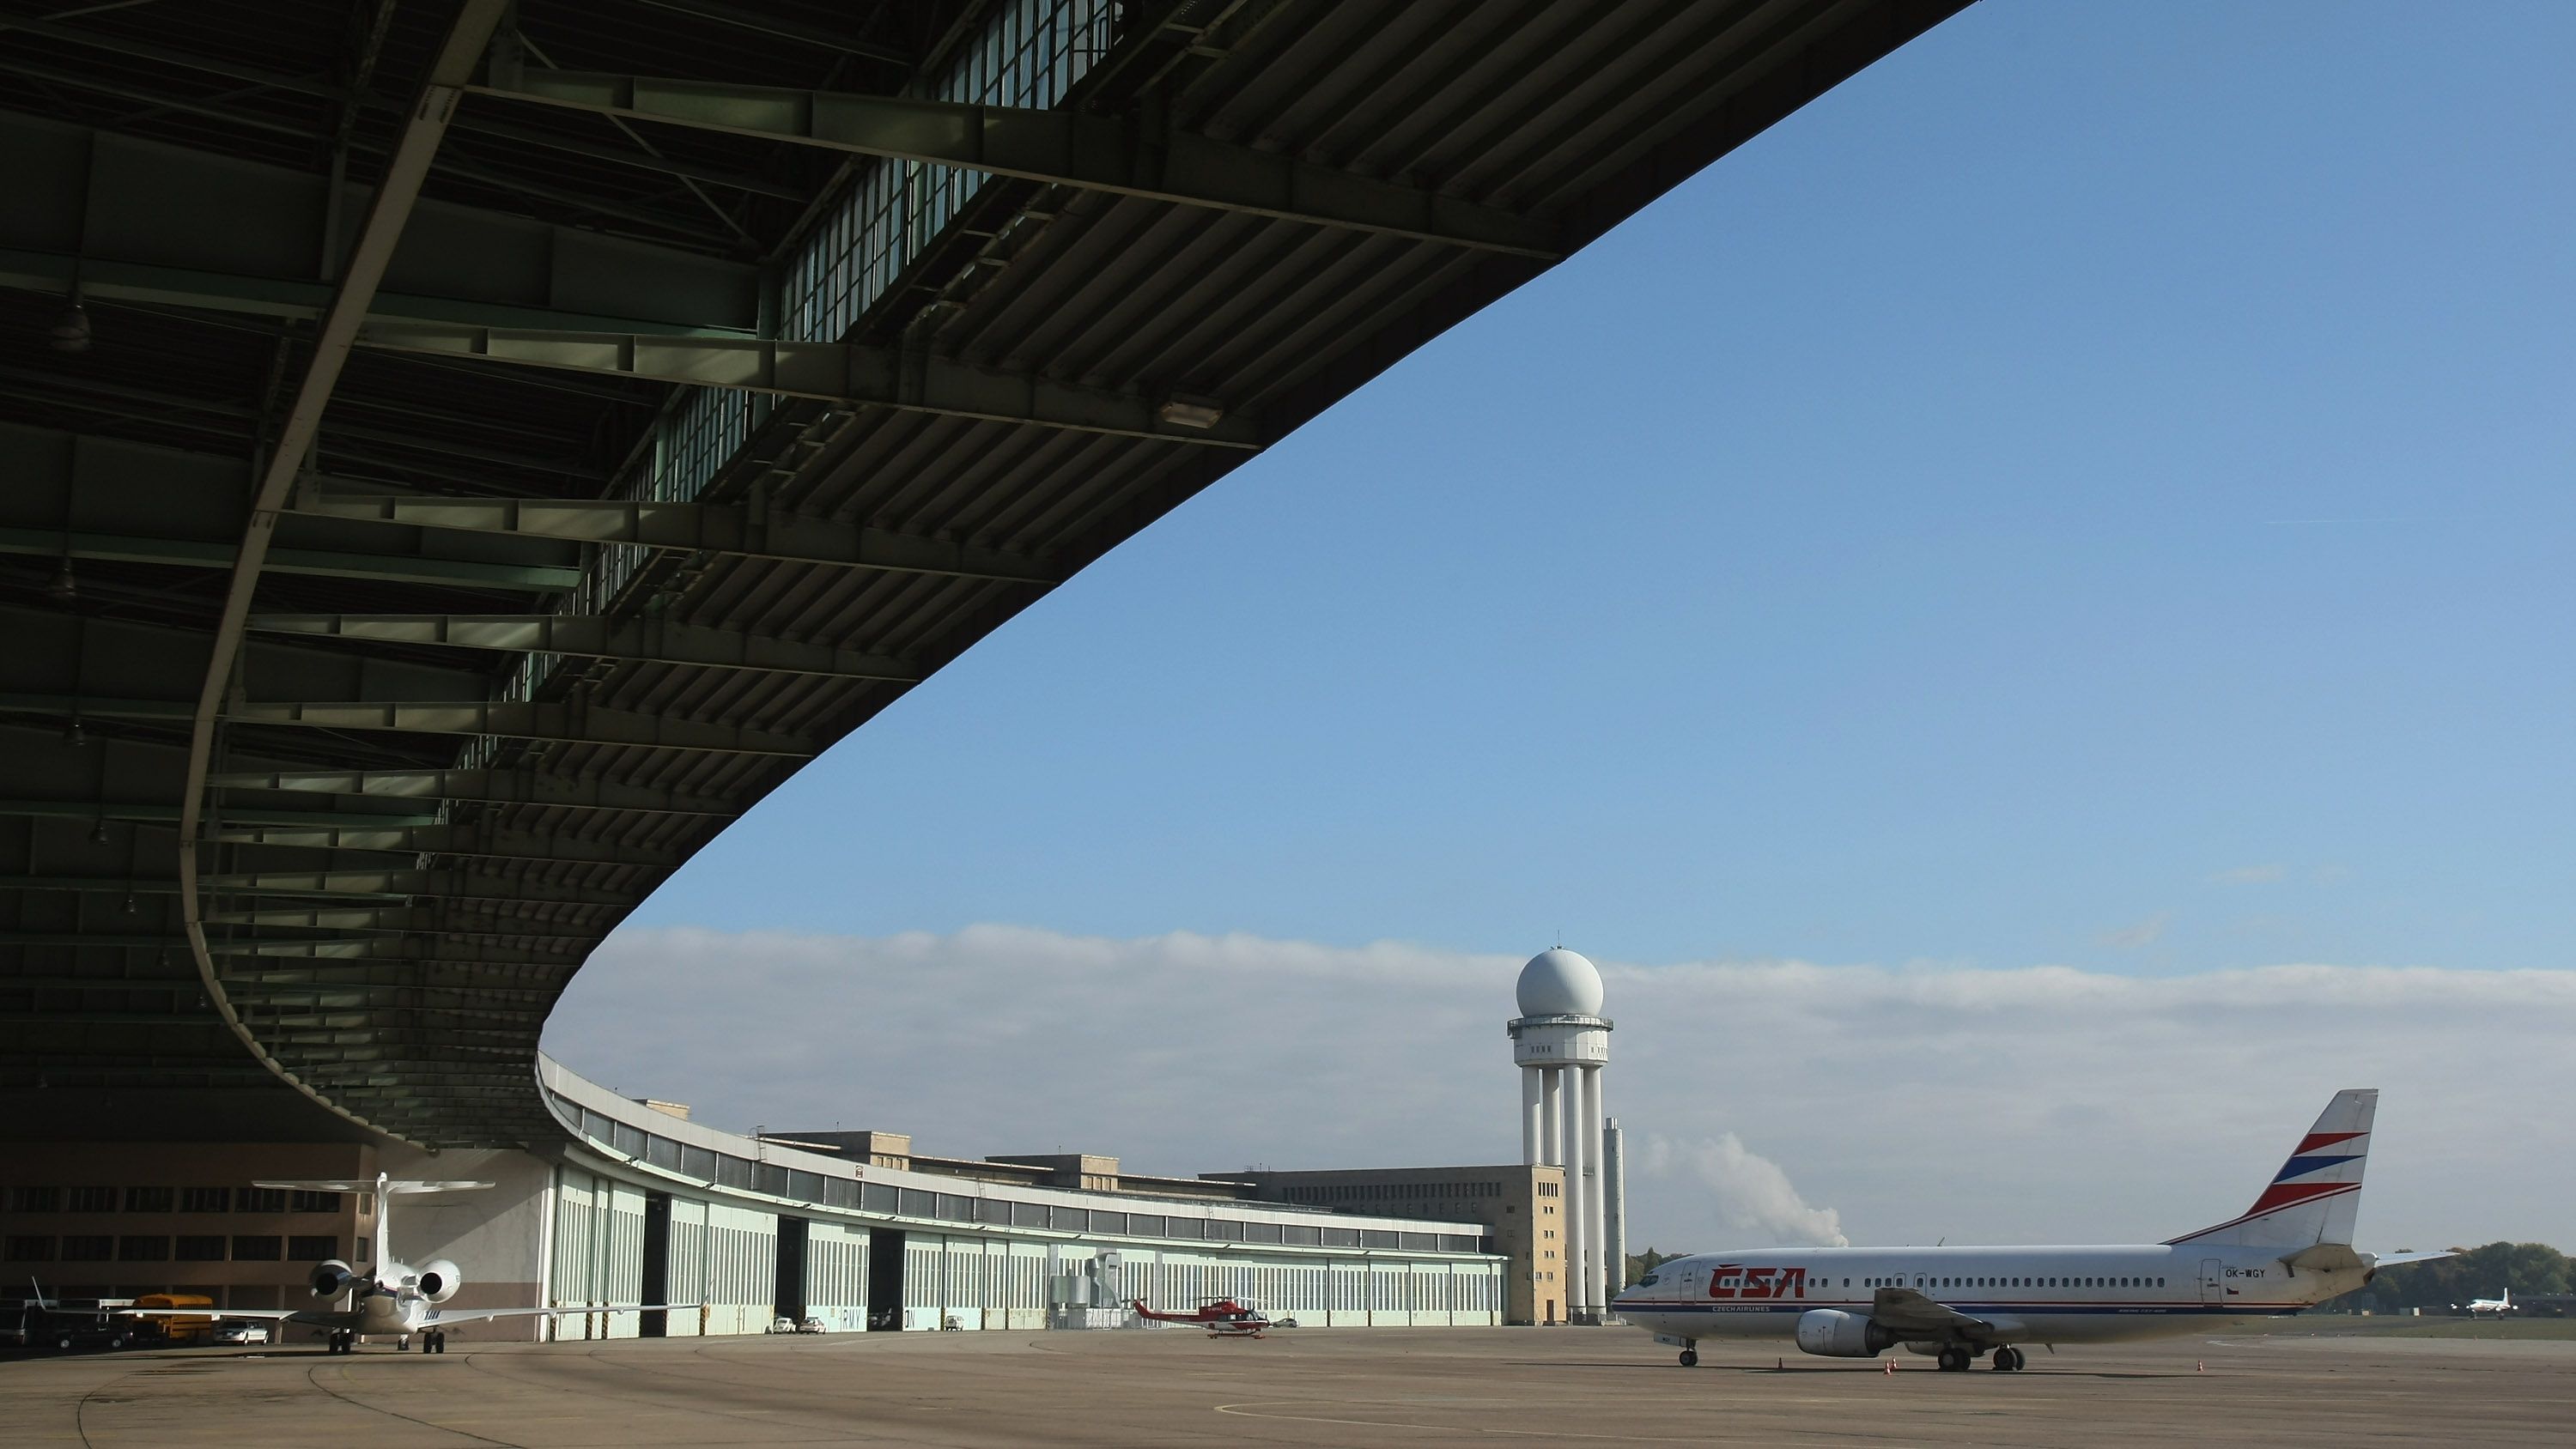 <strong>Tempelhof Airport, Berlin, Germany -- </strong>Berlin Tempelhof Airport closed in 2008. A former Nazi airfield and the site of the Berlin airlift during the Cold War, Tempelhof's history meshed with the city for over 80 years.